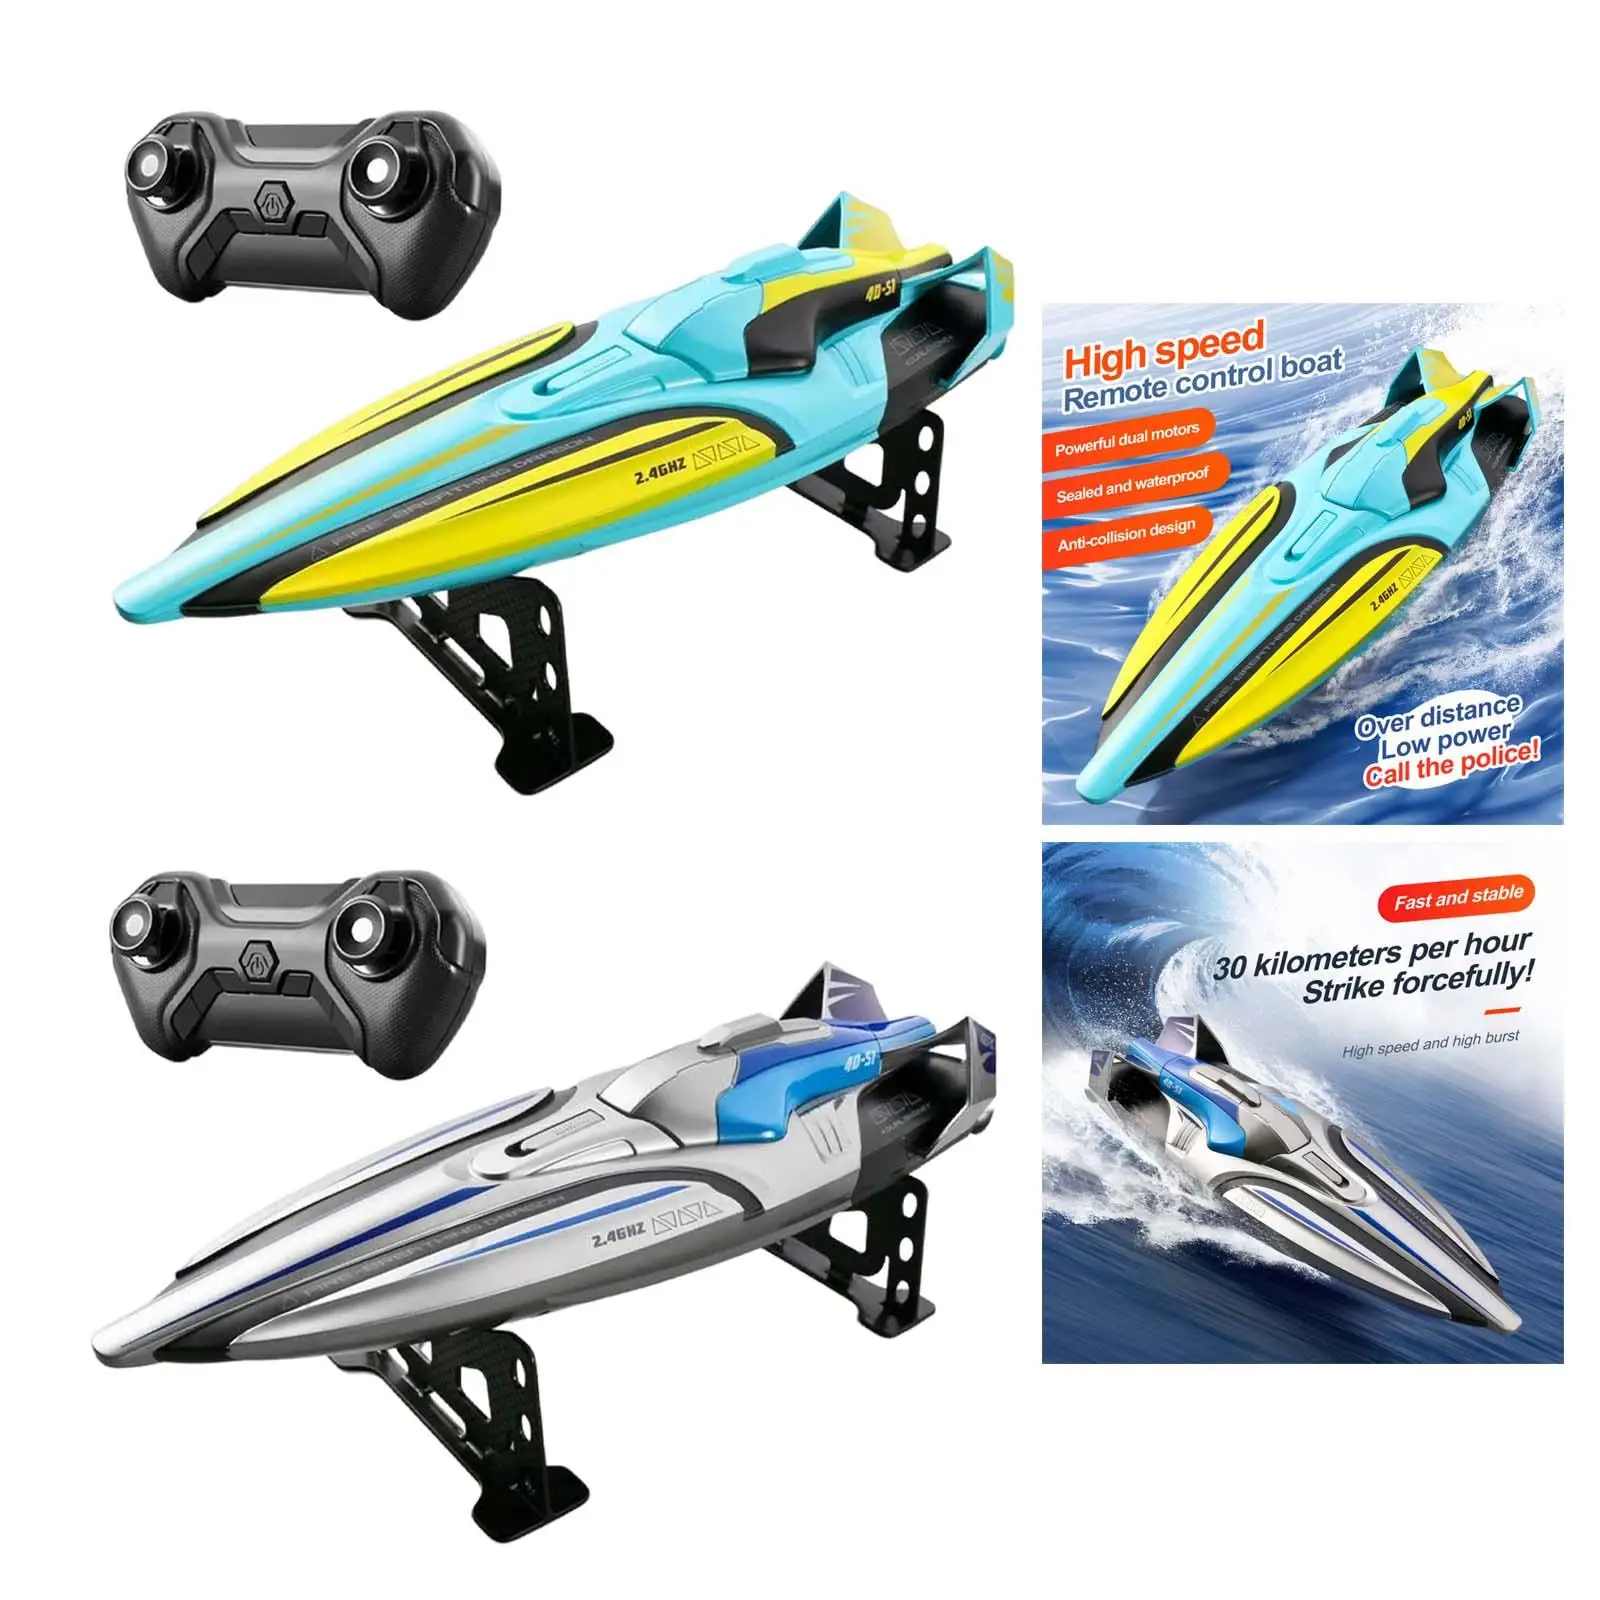 Remote Control Boat with Light Waterproof Left and Right 800mAh Forward 30km/H Dural Motor for Teens Adults Kids Birthday Gifts